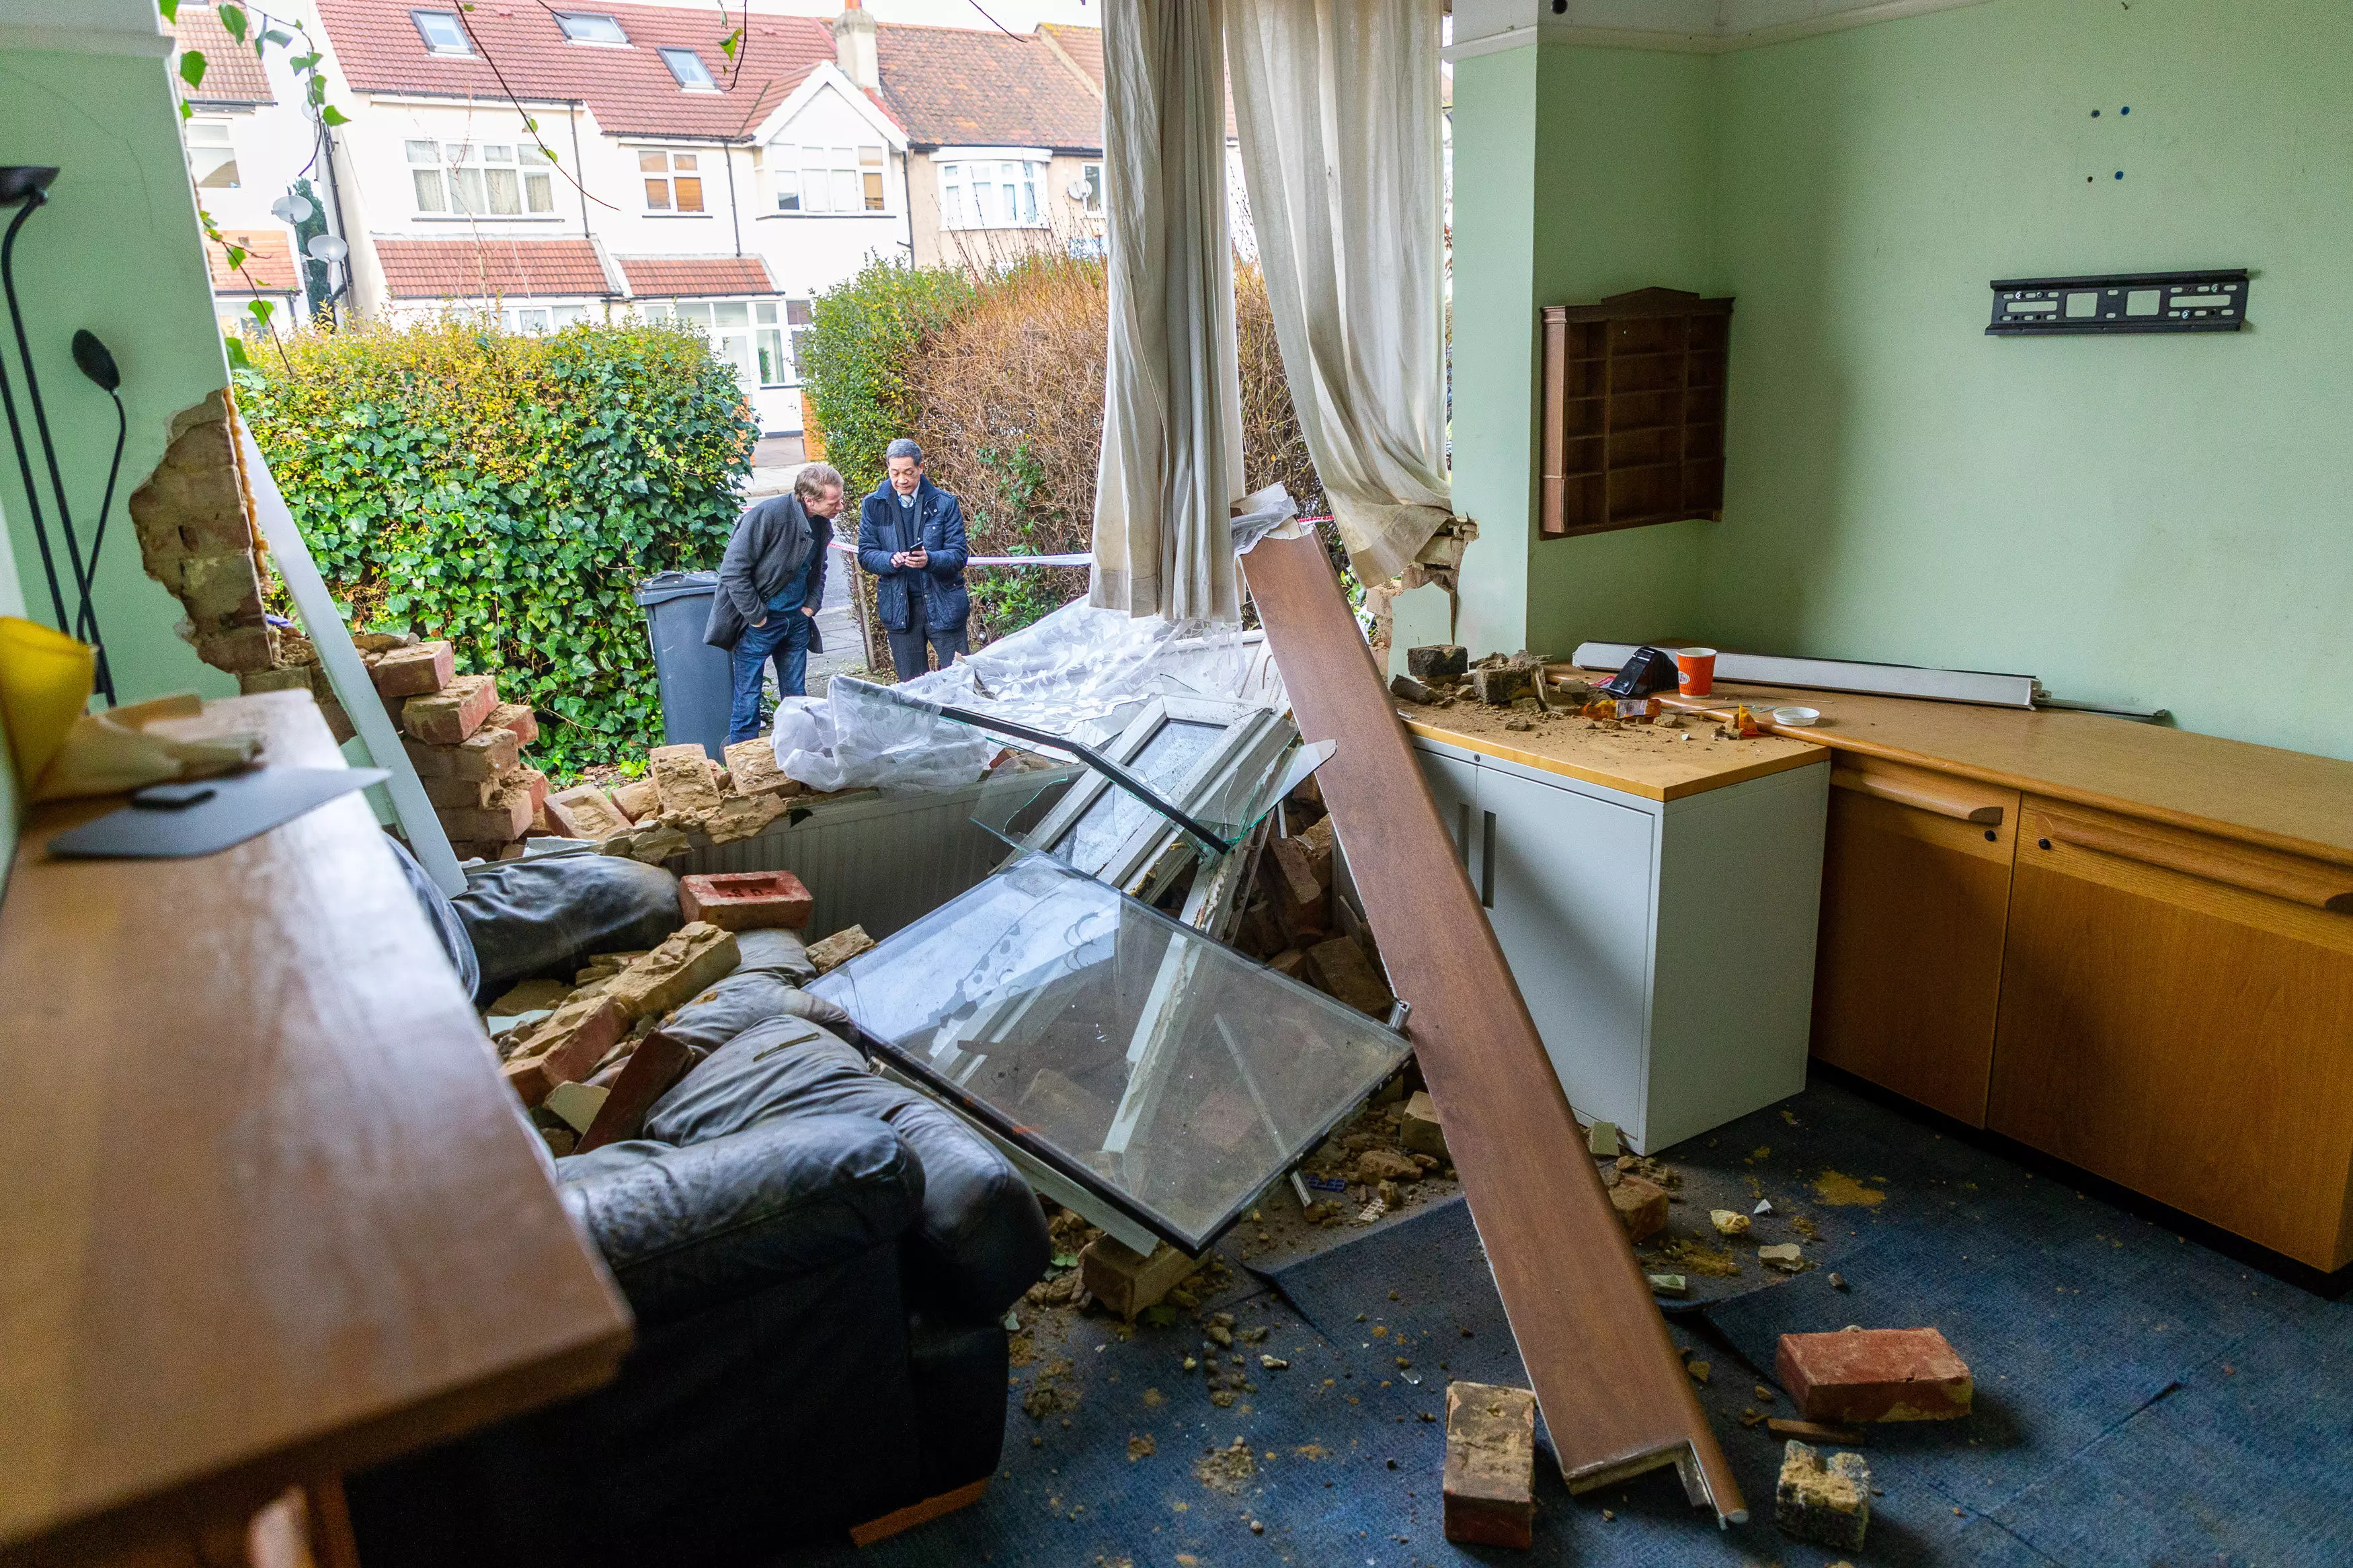 A house was left damaged in the incident.